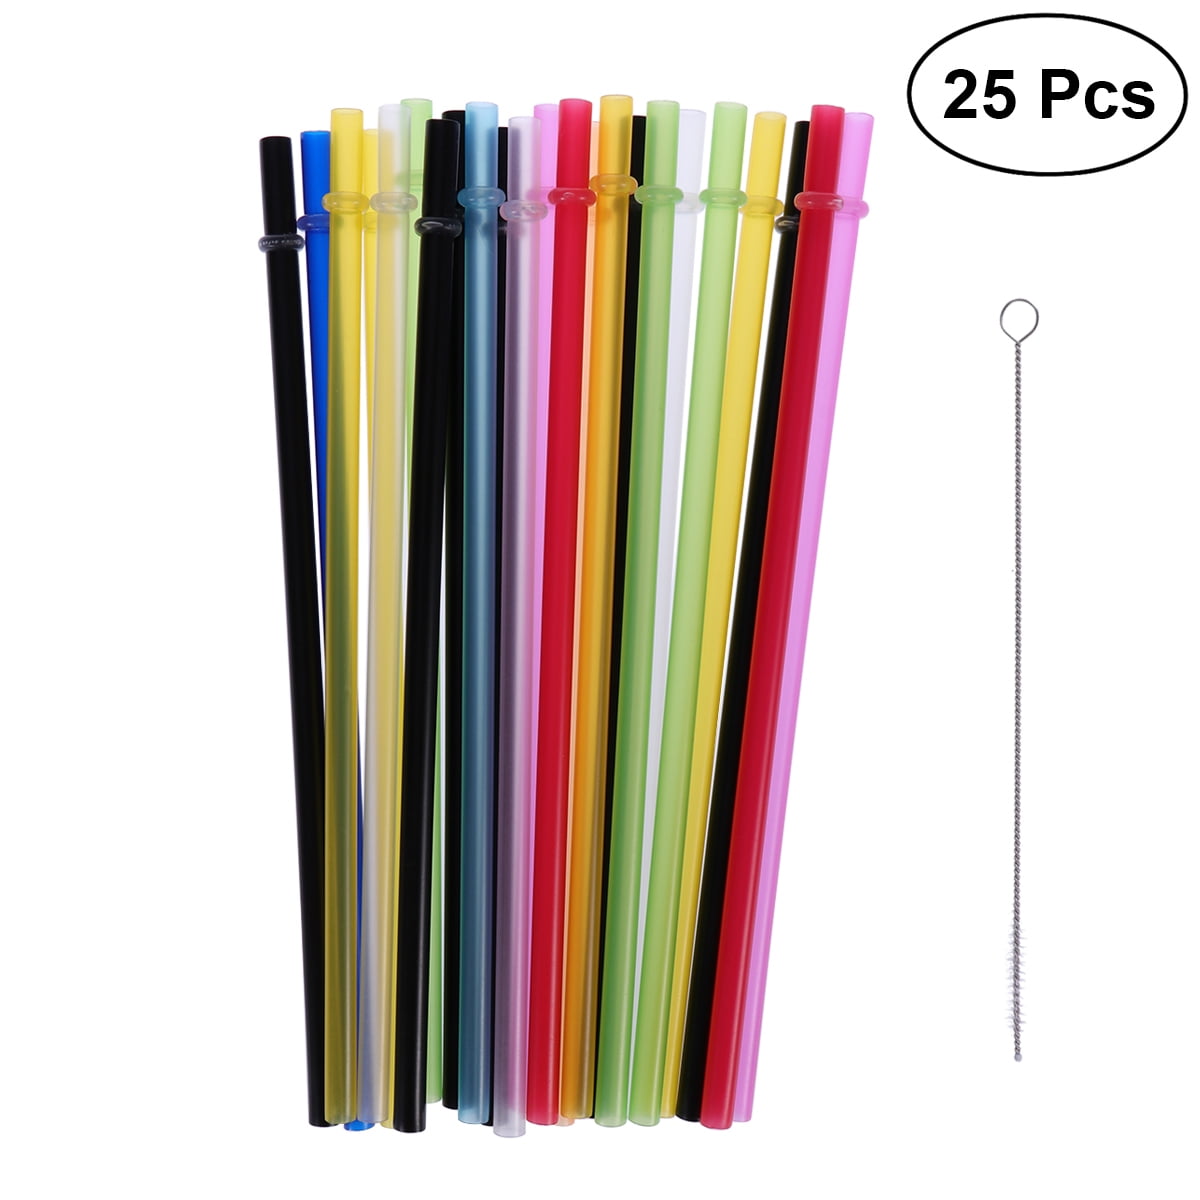 Profreshionals 24-Piece 9 inch Reusable Plastic Straws Set with Cleaning Brush